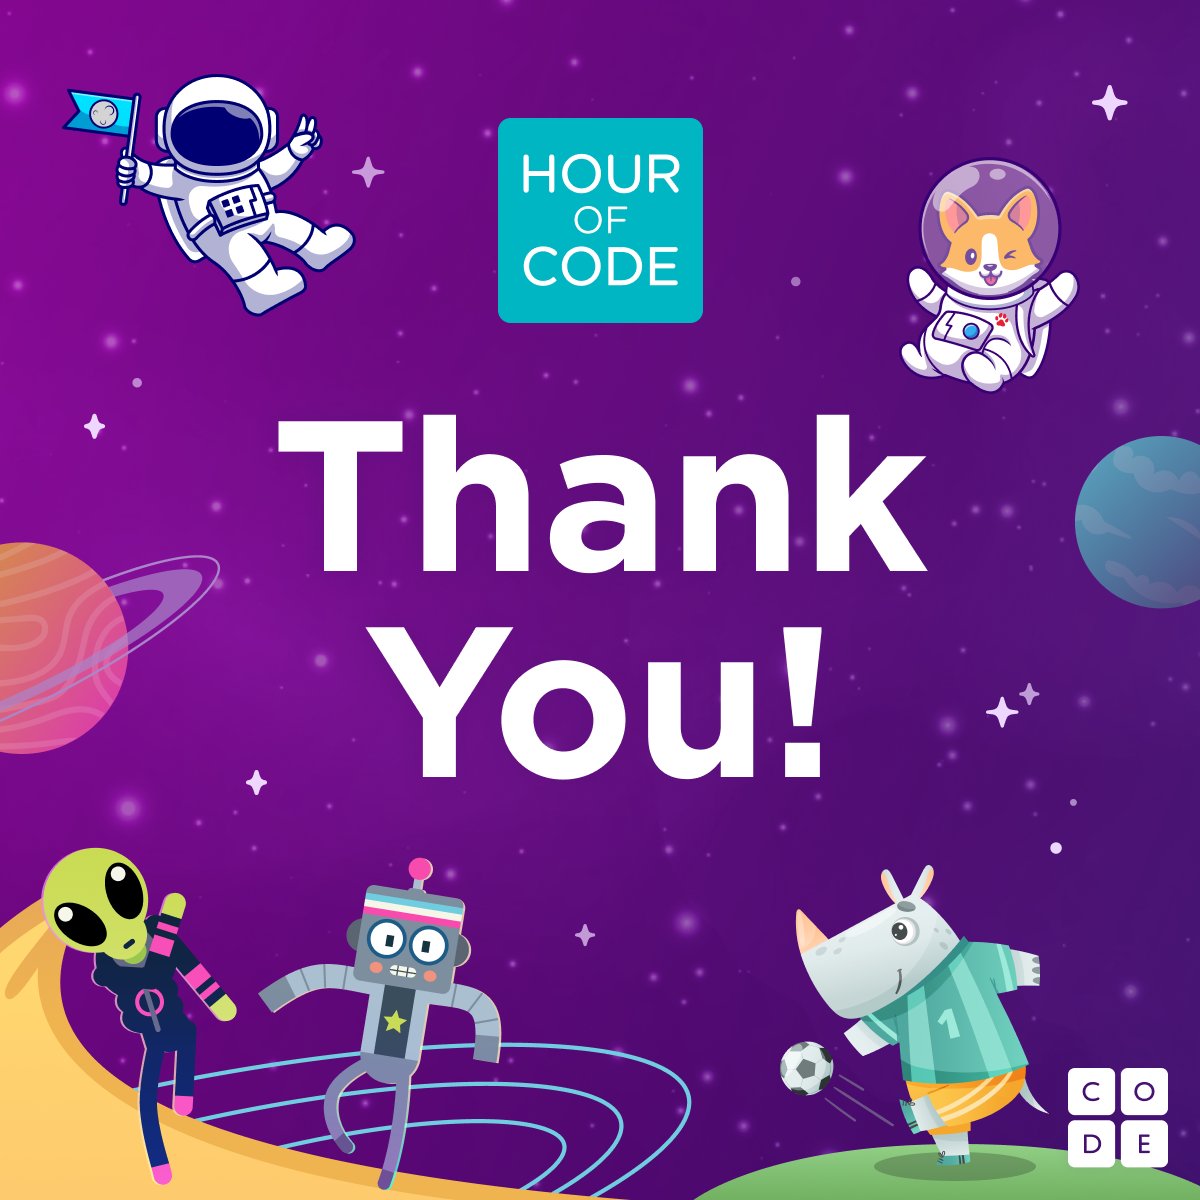 We want to say THANK YOU to every teacher, student, volunteer, advocate, and parent who participated in #HourOfCode. We're honored to work w/ you to ensure every student in every classroom has the opportunity to explore, play, and create w/ computer science. See you next year! ❤️